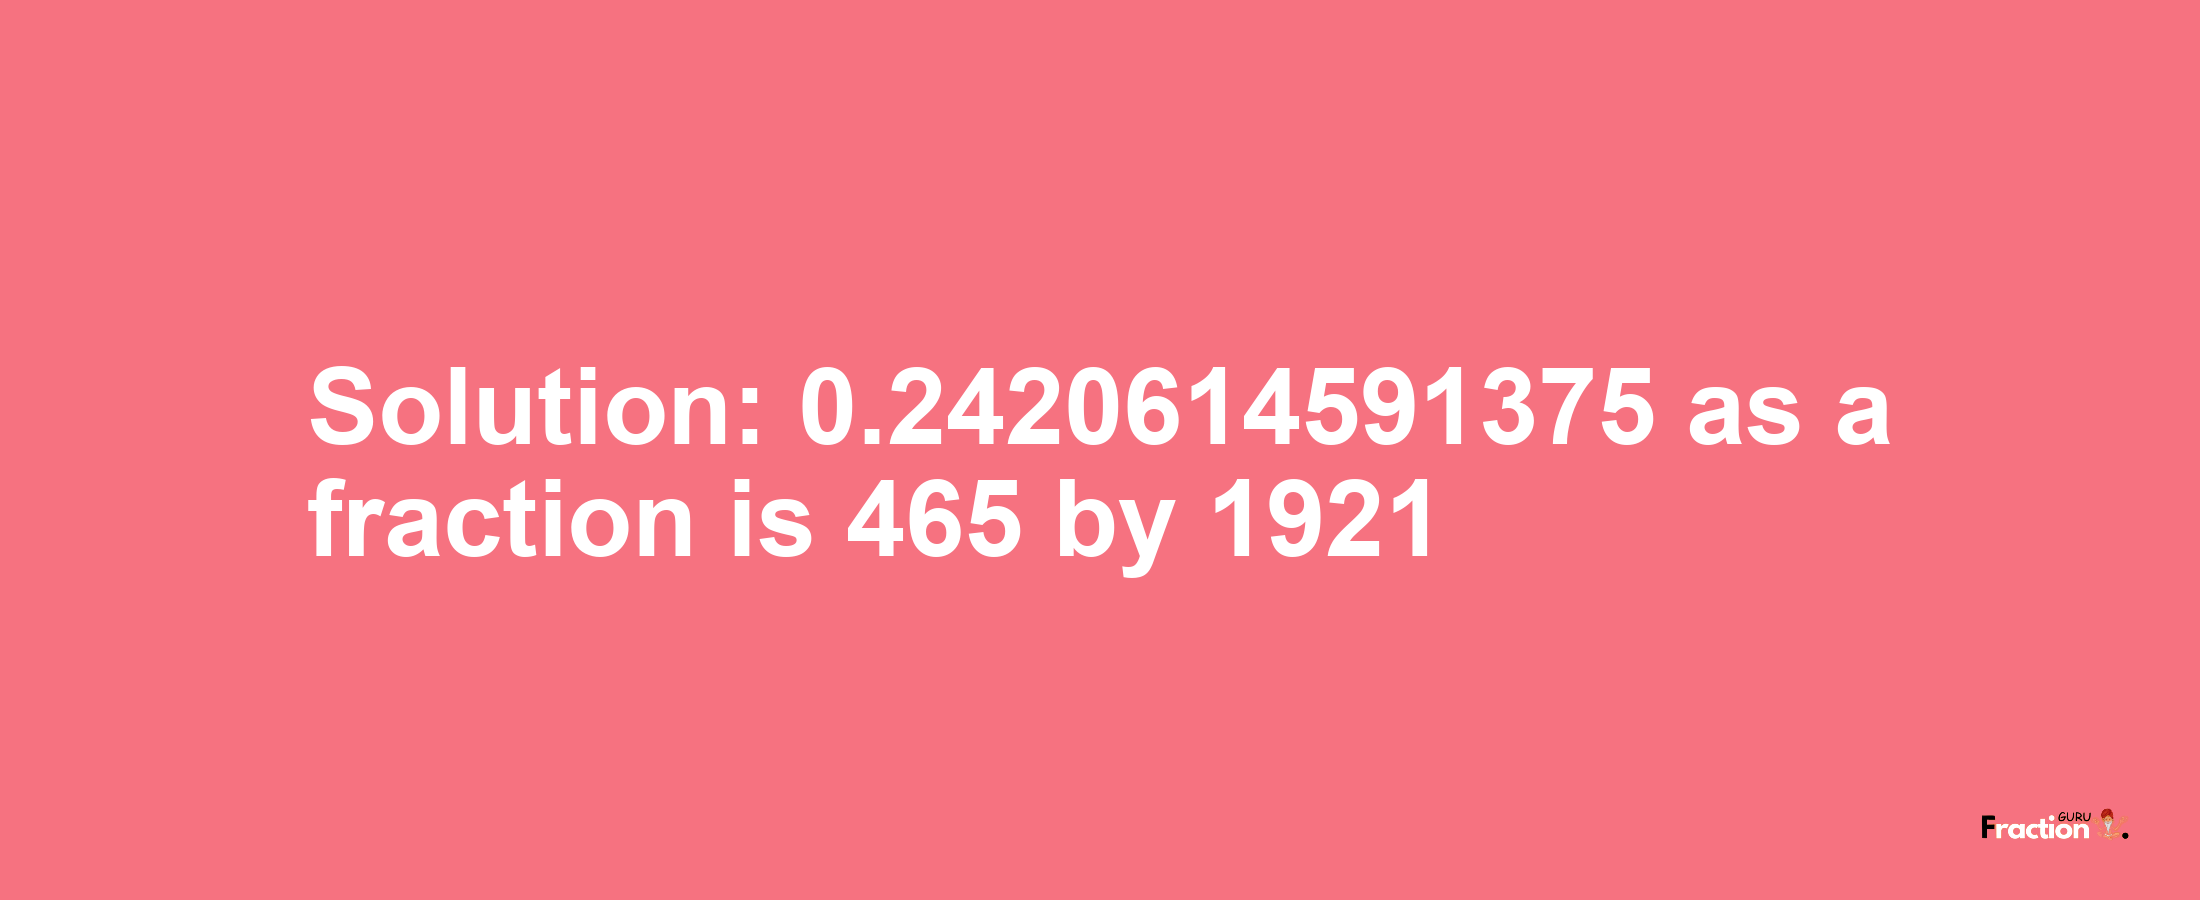 Solution:0.2420614591375 as a fraction is 465/1921